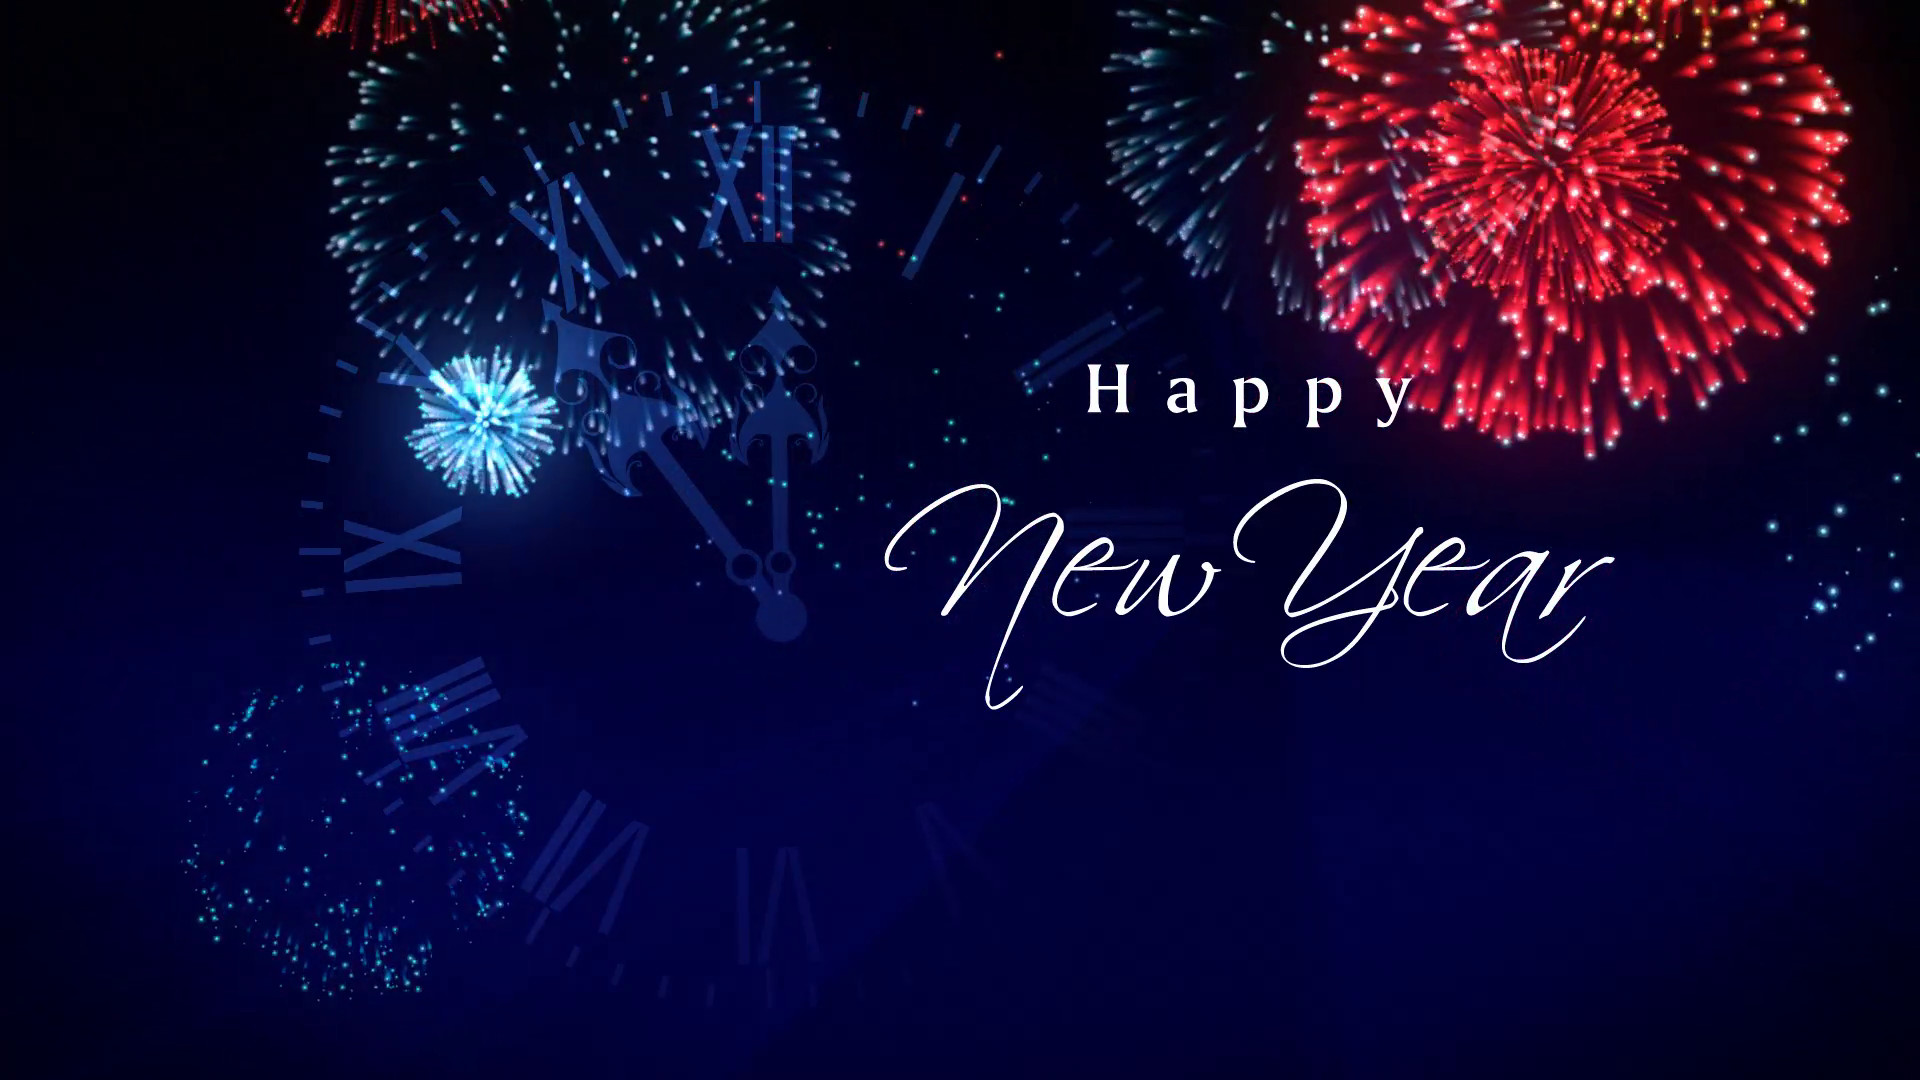 1920x1080 Subscription Library Happy New Year Fireworks